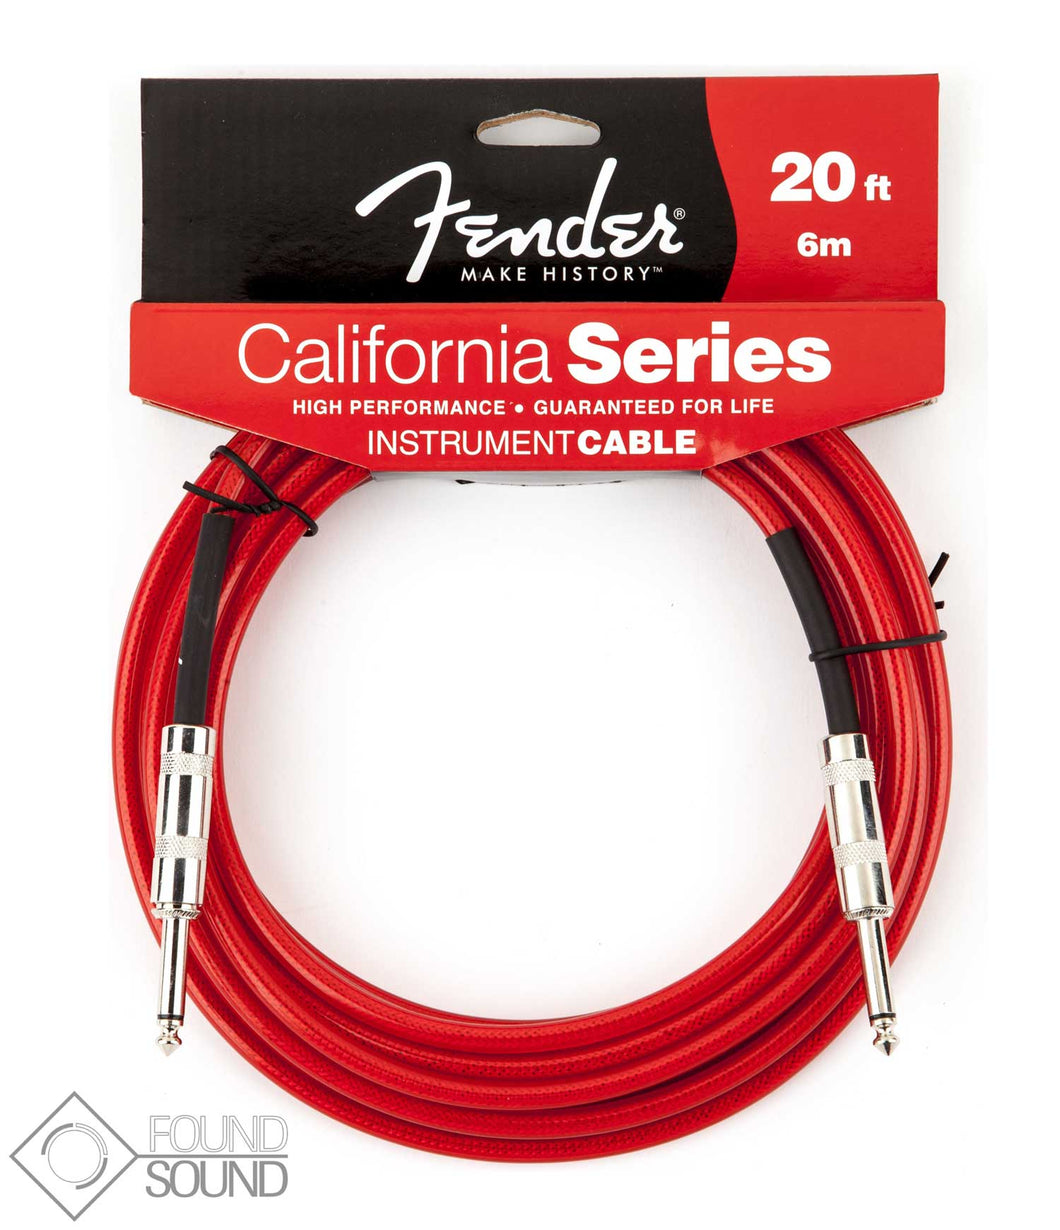 Fender California Series 20 Foot Instrument Cable (Red)